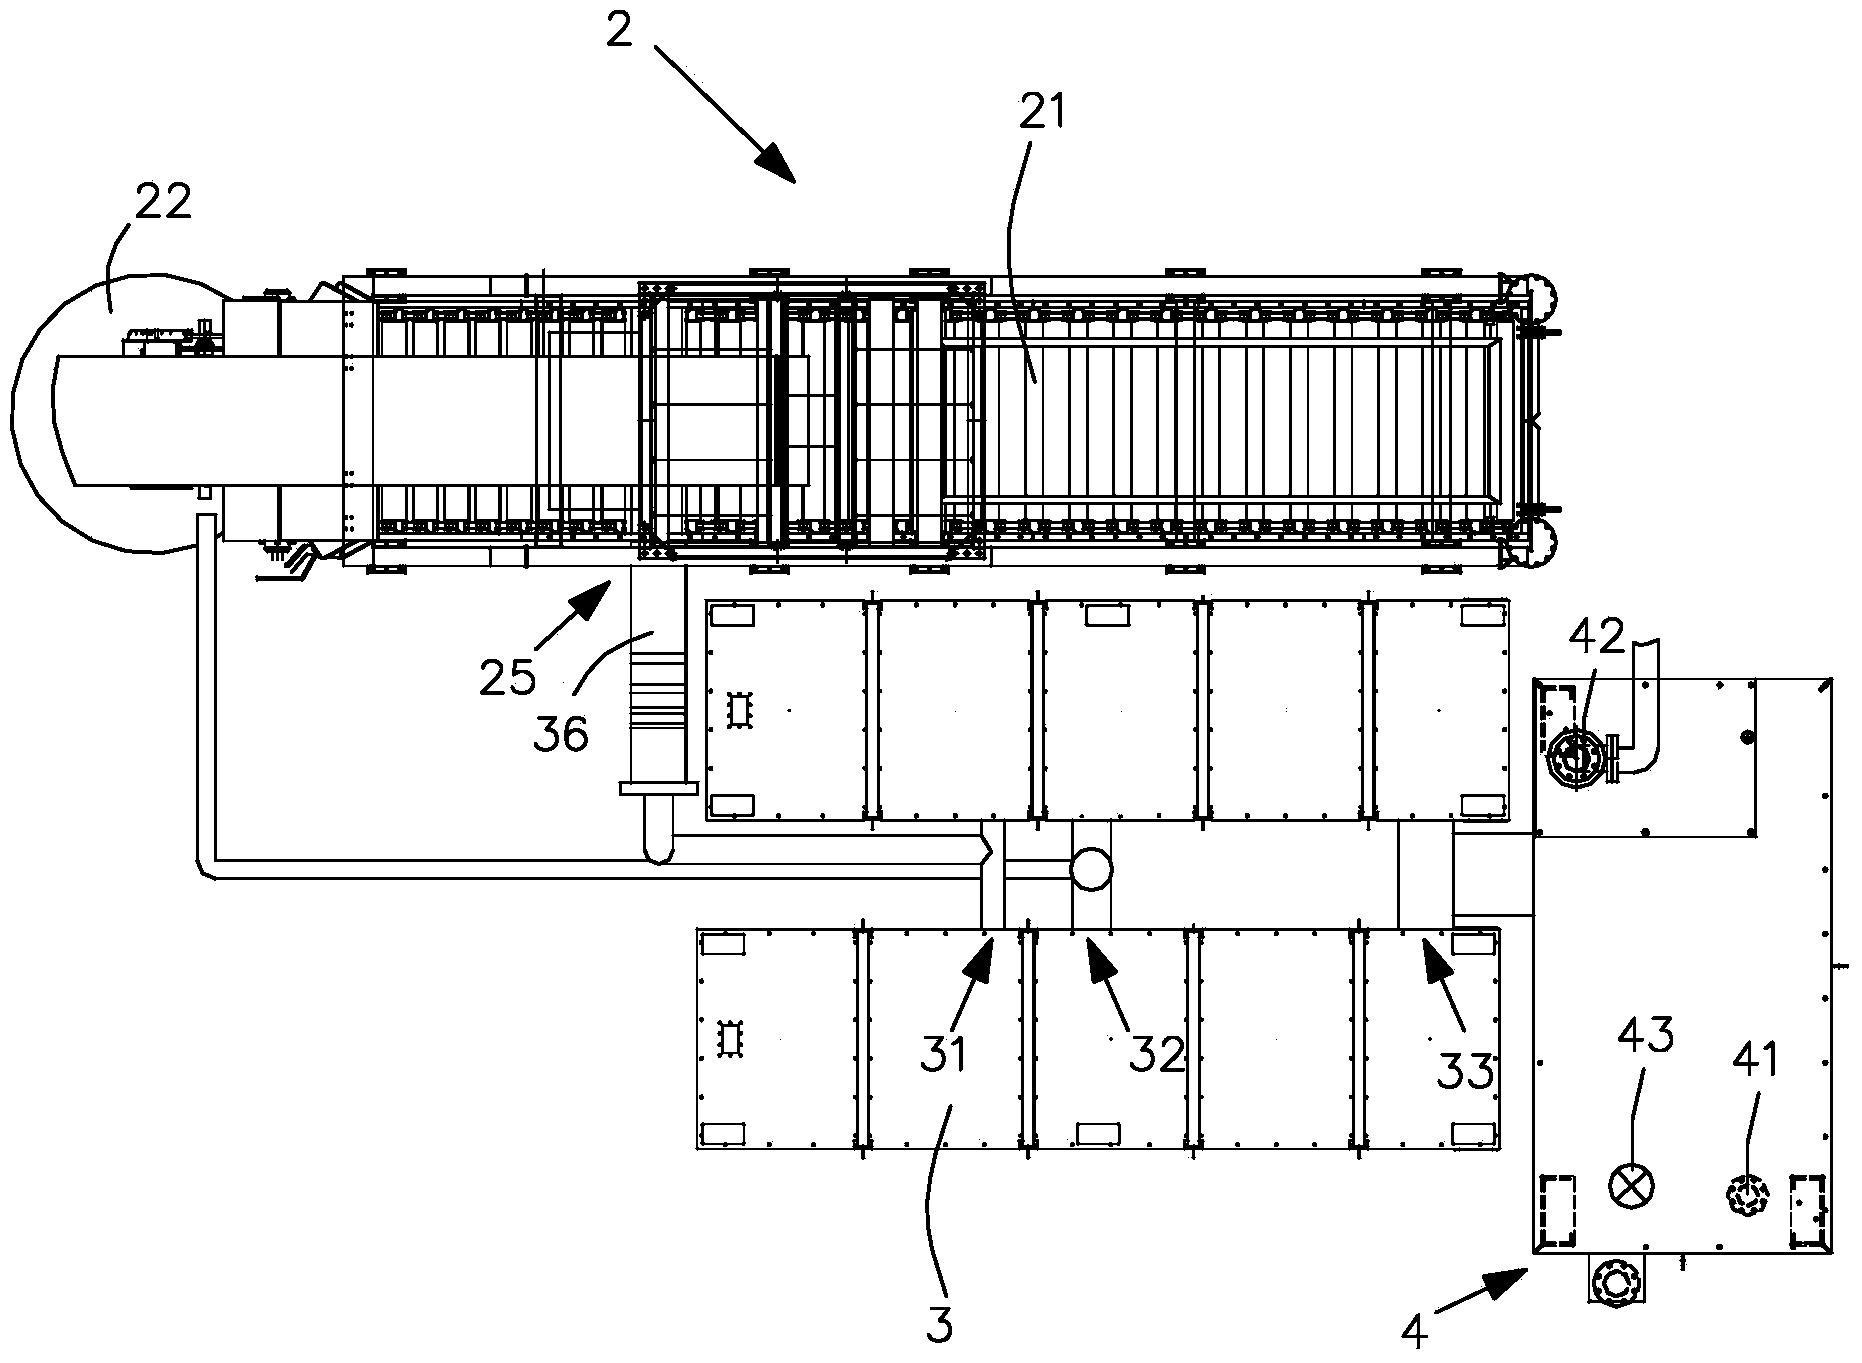 Storage battery recovery and separation system